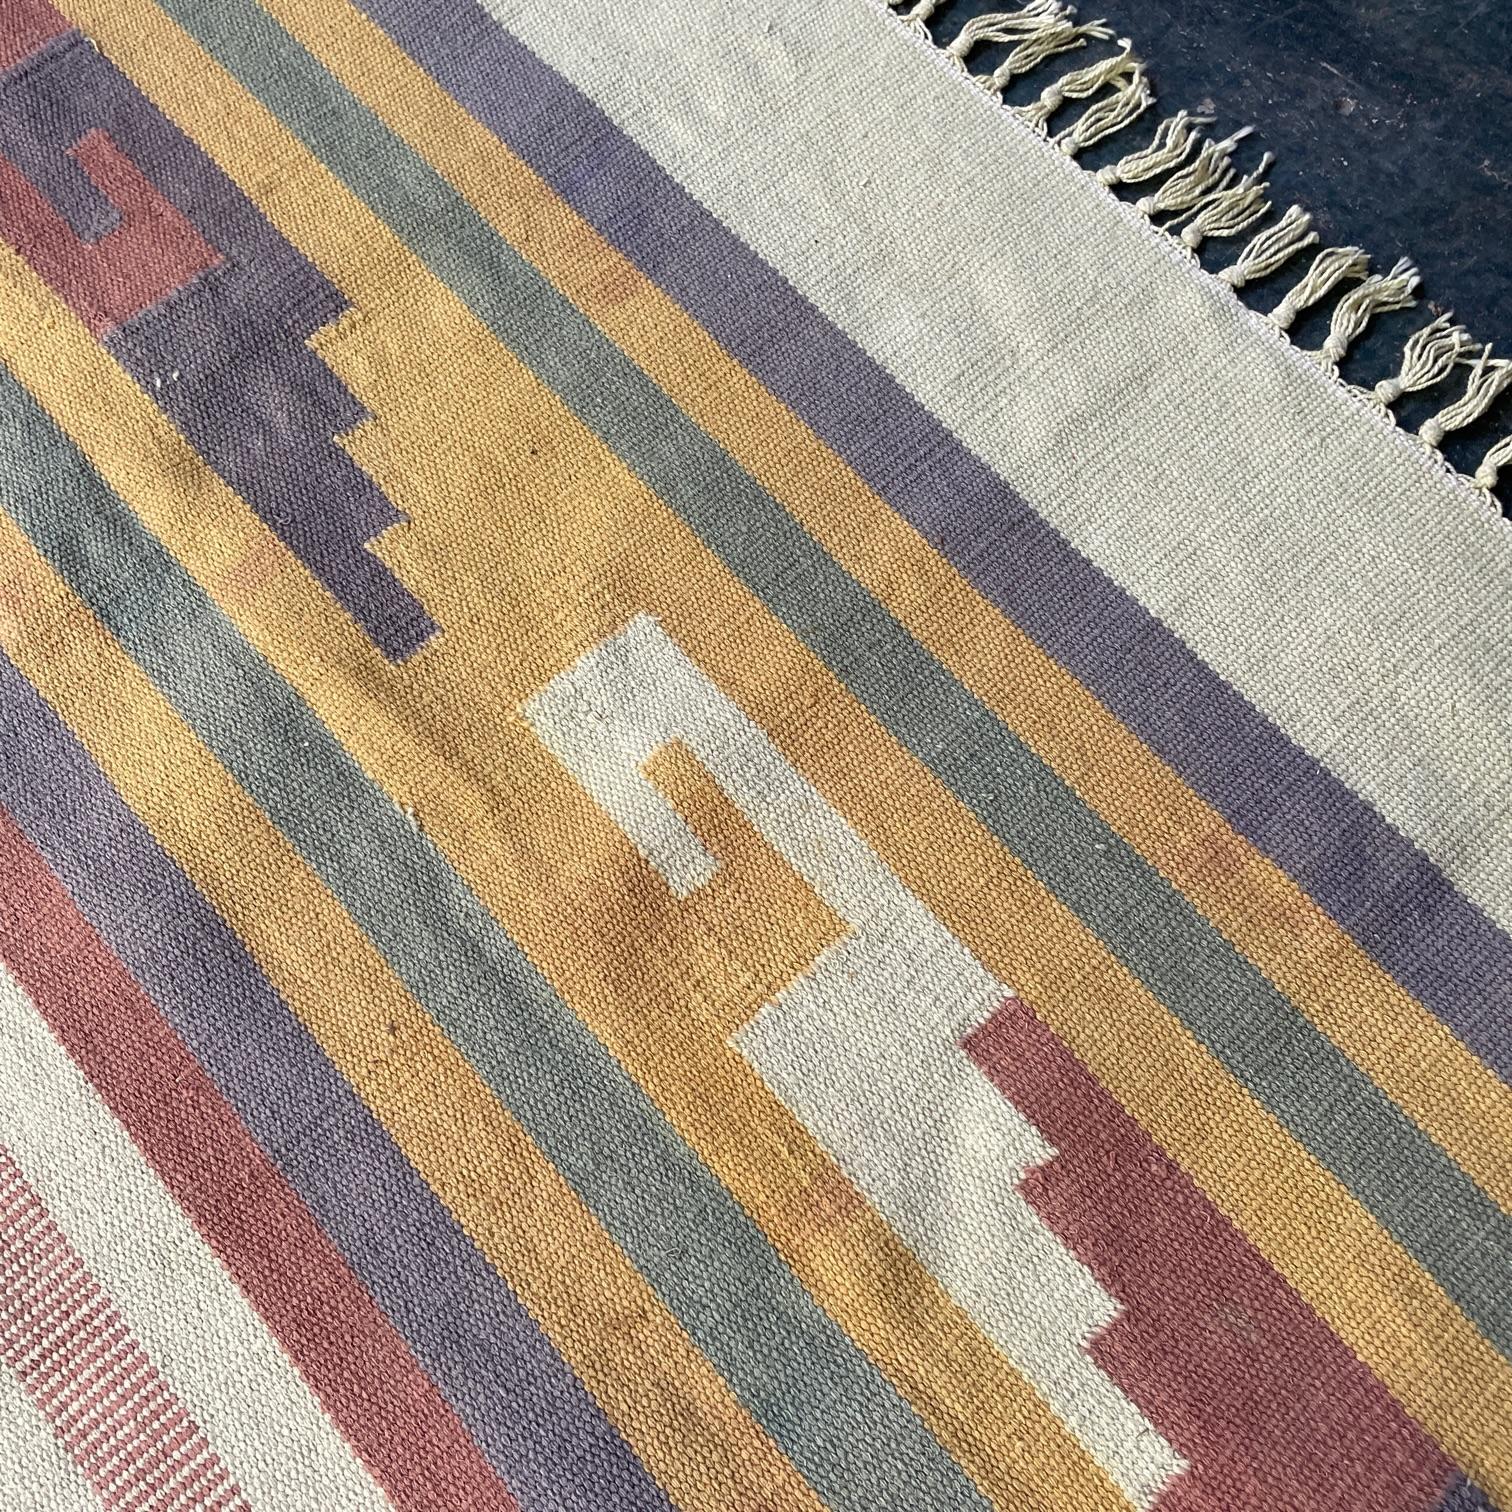 Vintage Mid-Century Geometric Native American Rug 3 by 5 Desert Motif In Fair Condition For Sale In Hyattsville, MD